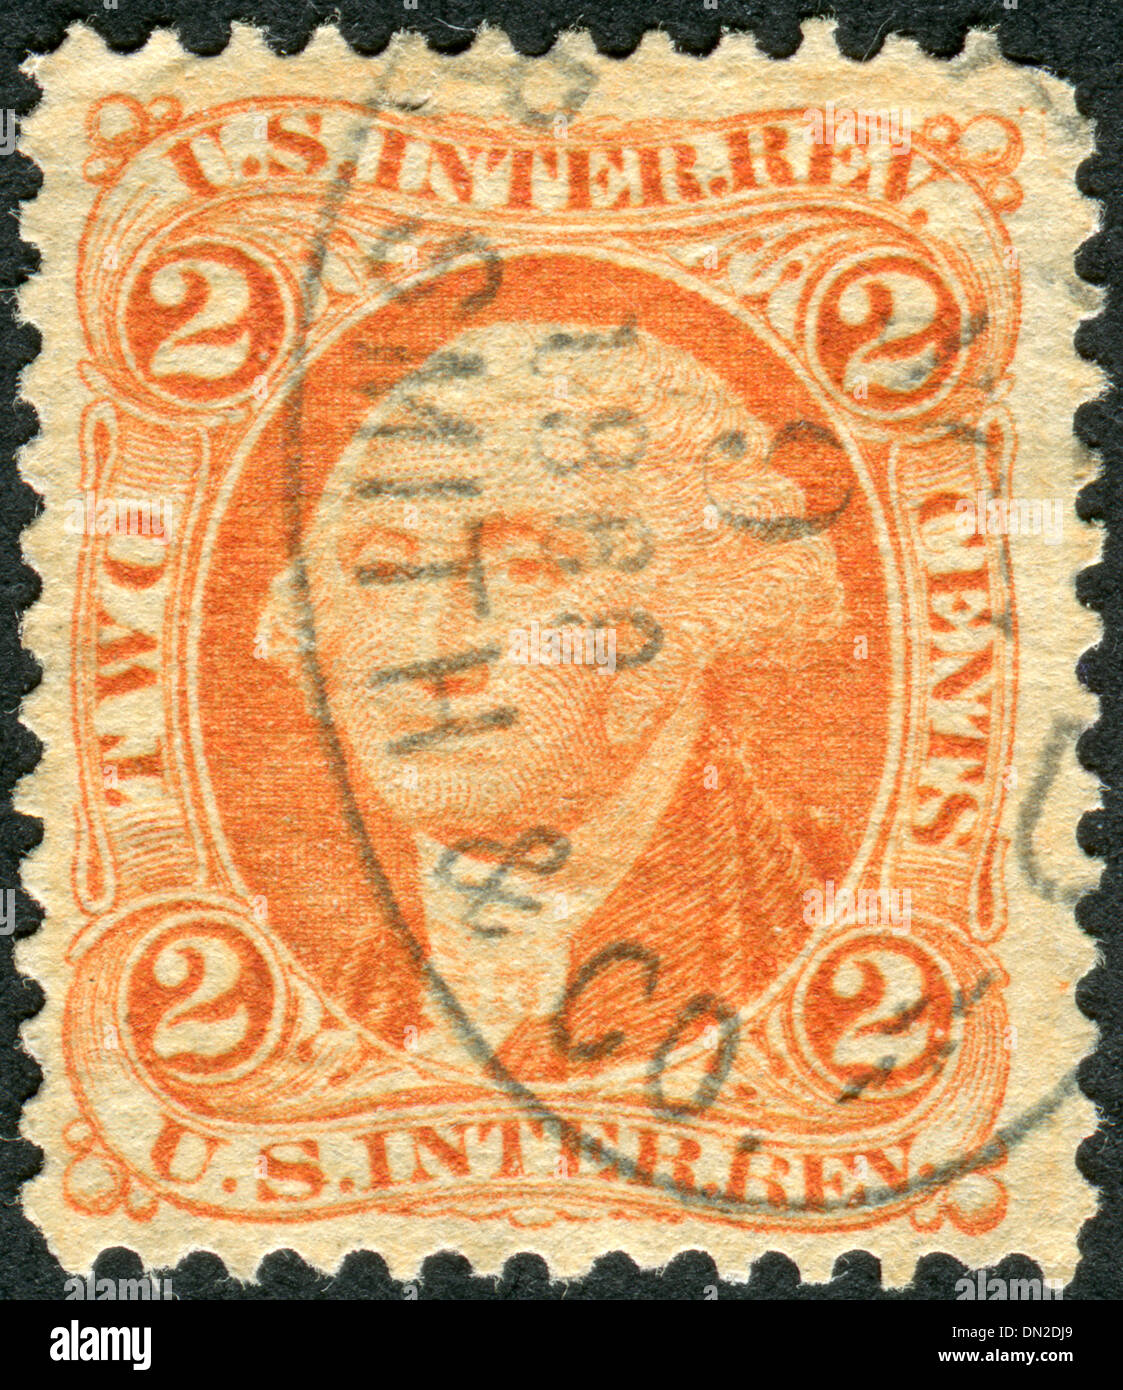 USA - CIRCA 1864: Revenue stamp printed in the USA, First Issue, shows Head of George Washington in Oval, circa 1864 Stock Photo